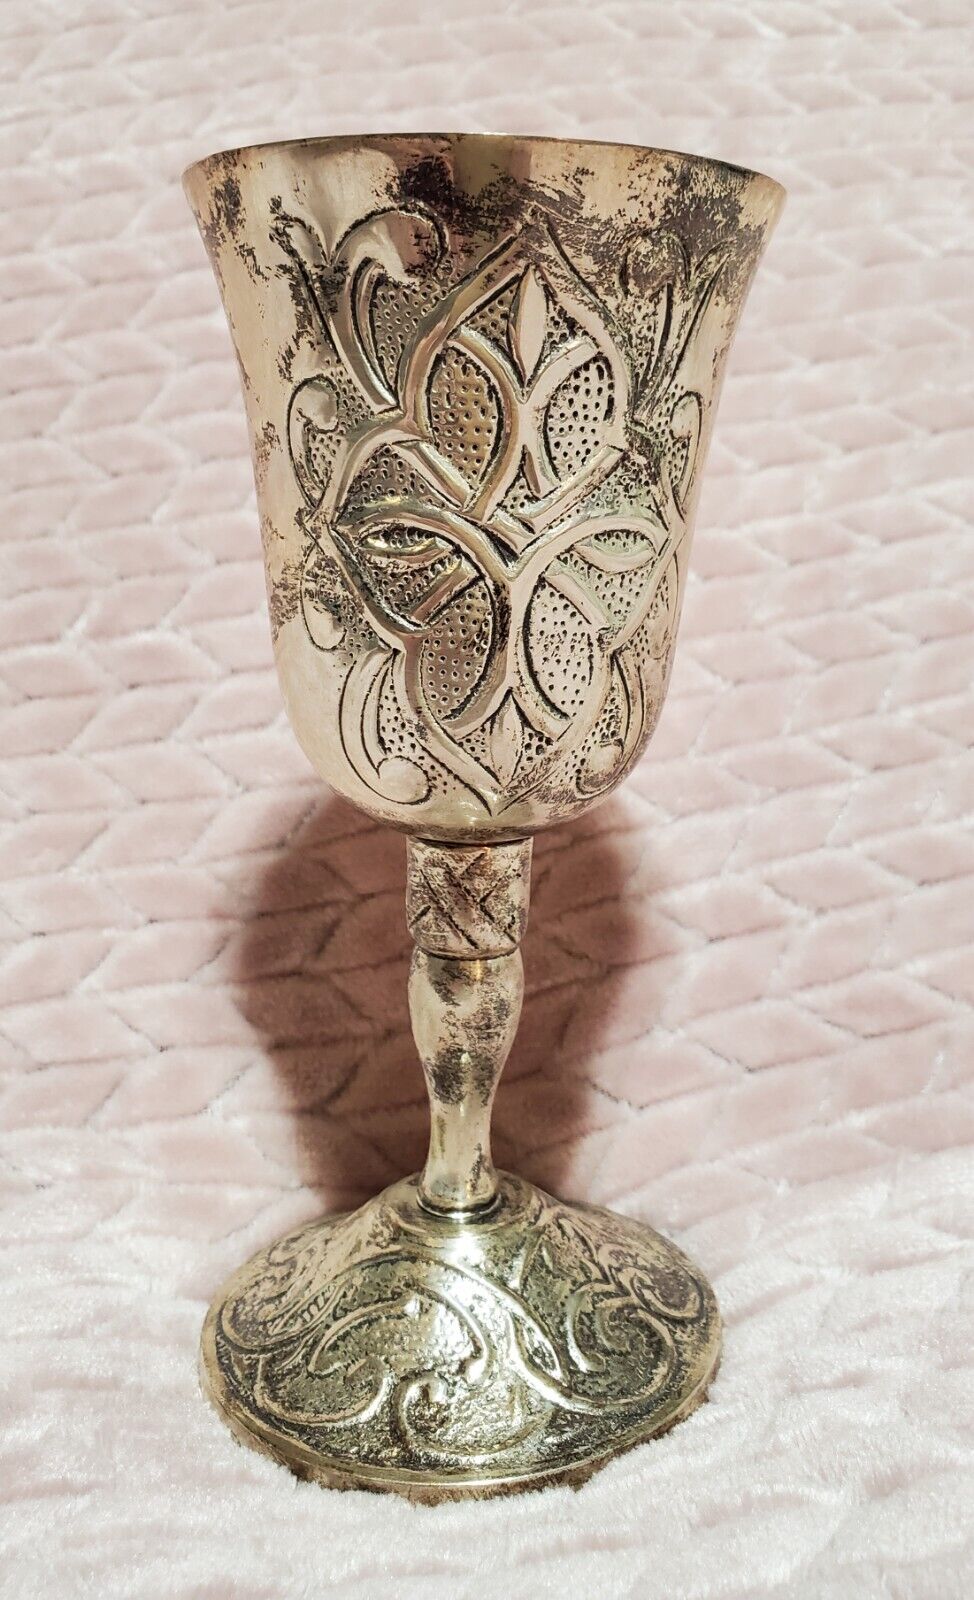 1996 Forevermore Kimberly McSparran Carson Celtic Statesmetal Goblet